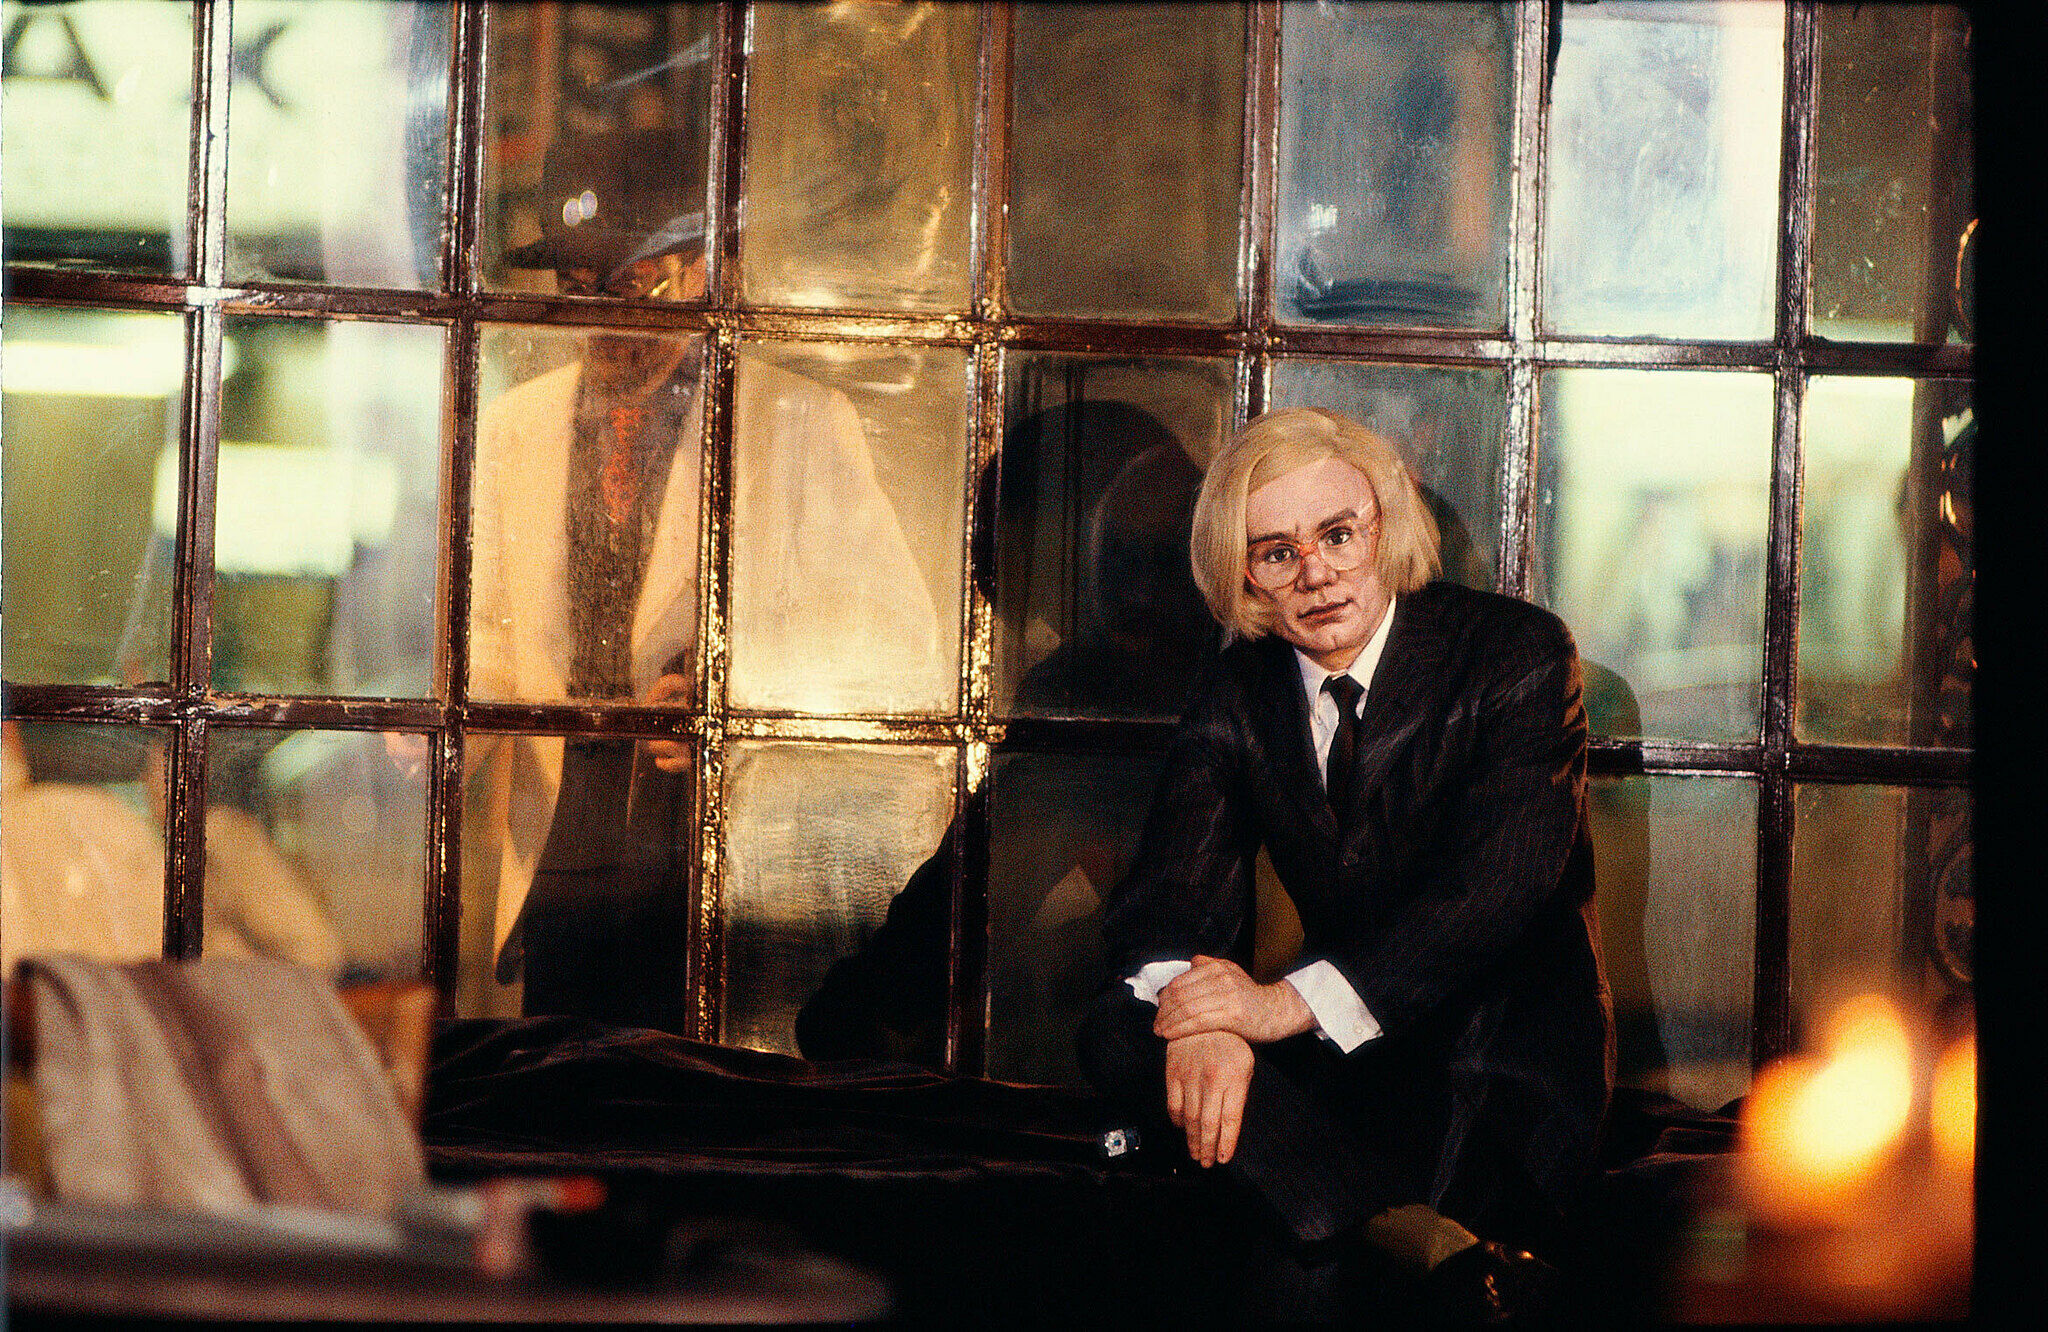 An artwork featuring Andy Warhol by the window.